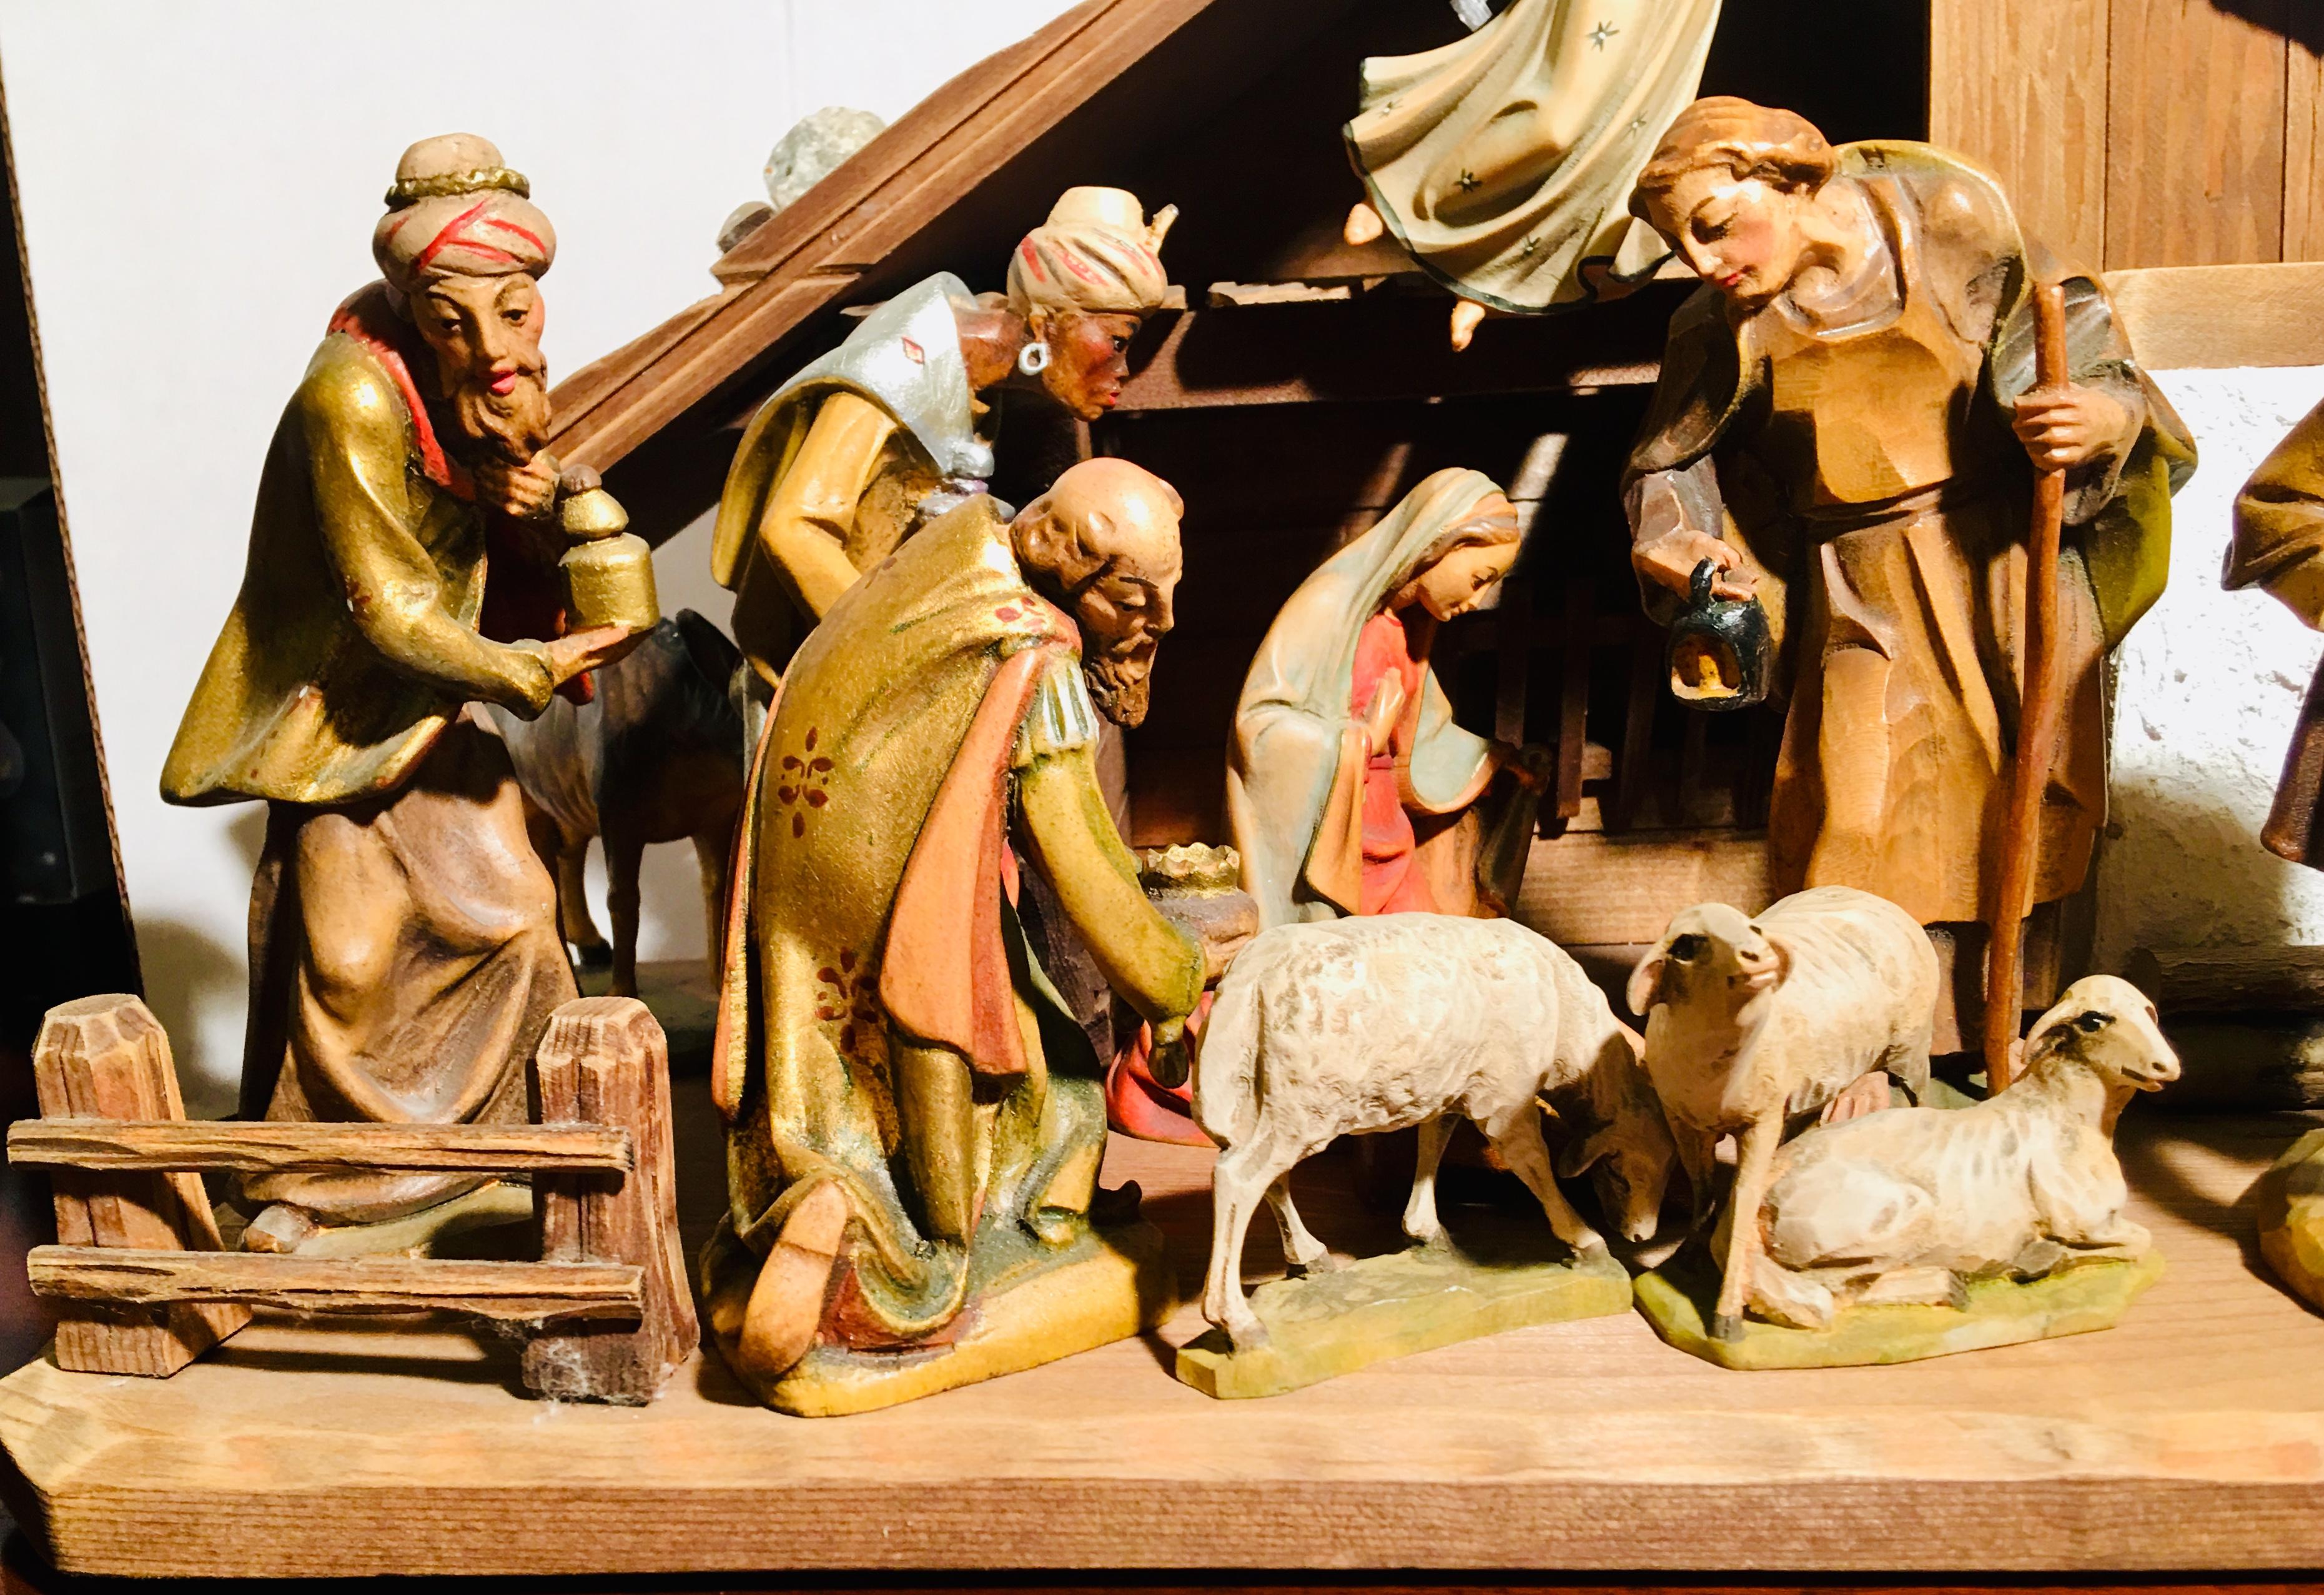 Handmade and hand carved, hand painted, beautifully detailed linden wood nativity scene from the Dementz Family DEUR Art Company in South Tyrol, Italy, is a Christmas decorating focal point. An heirloom to pass down through the